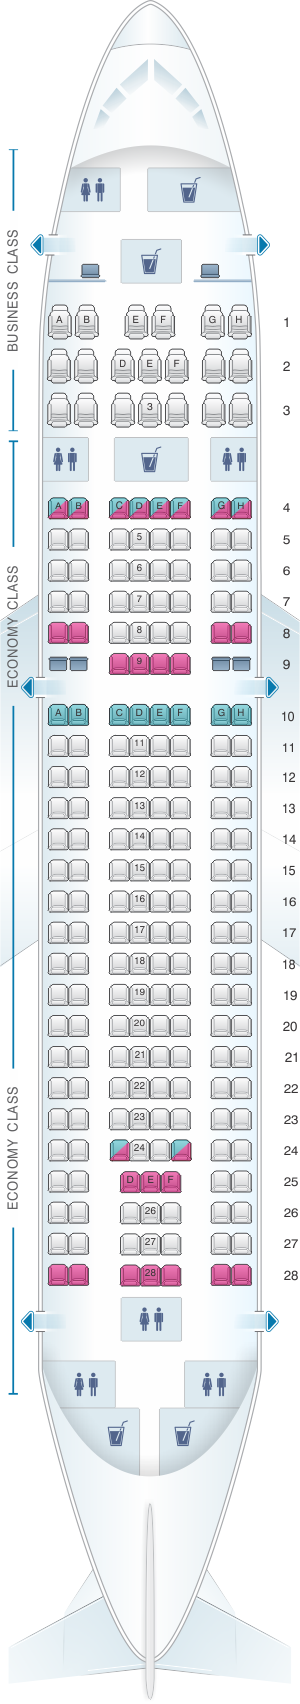 Avianca Airbus A318 Seating Chart